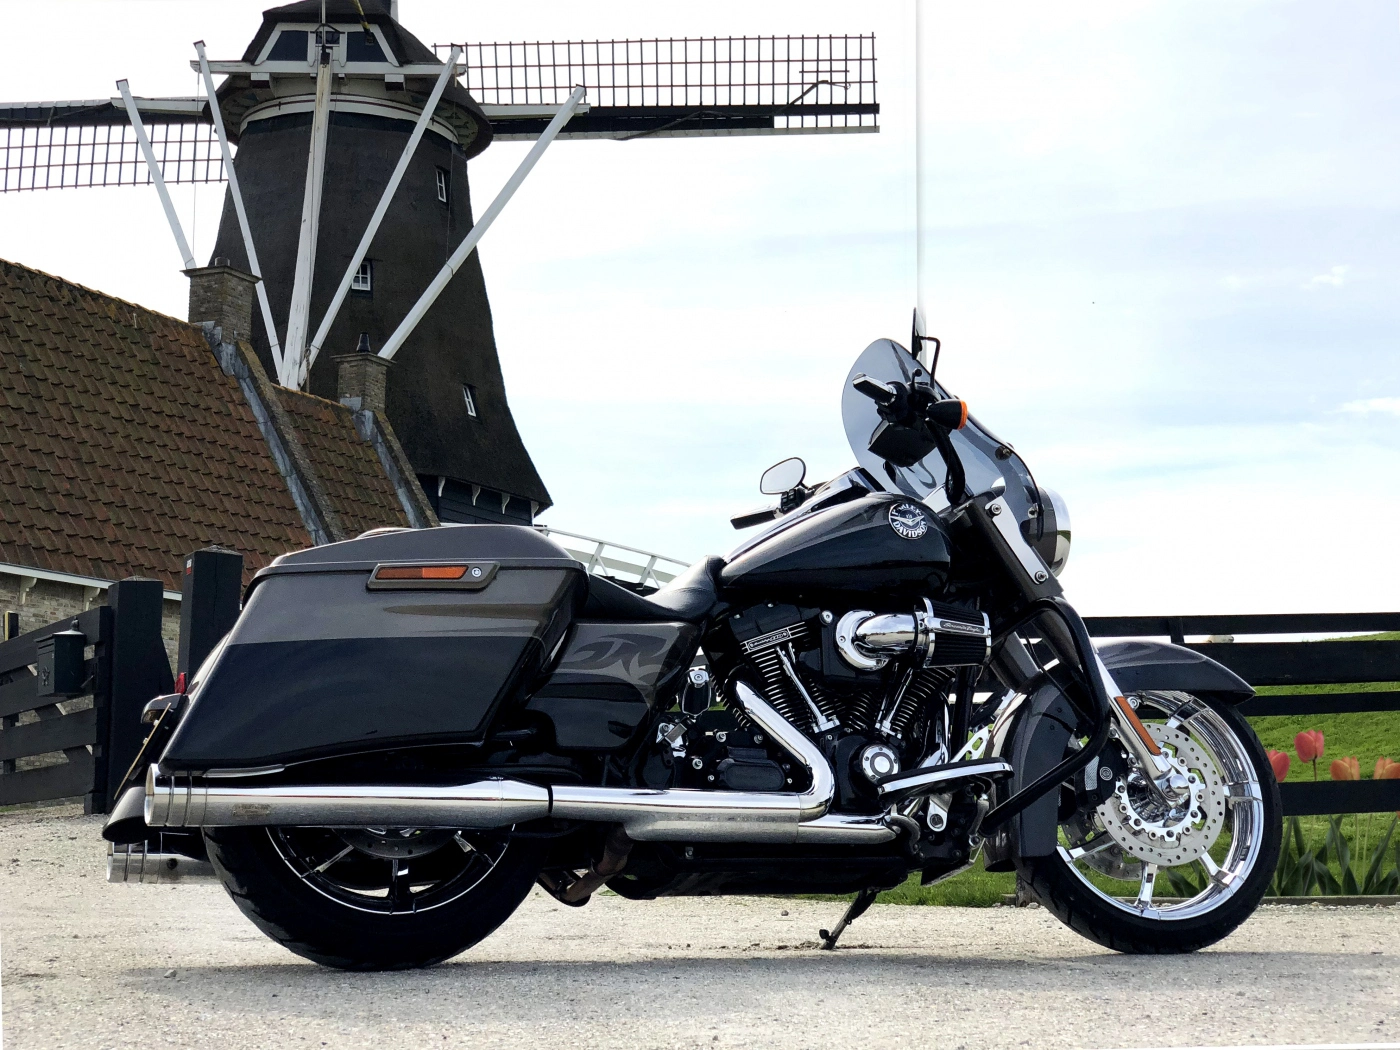 The Harley-Davidson Road King with a Exhaust by Dr. Jekill & Mr. Hyde®